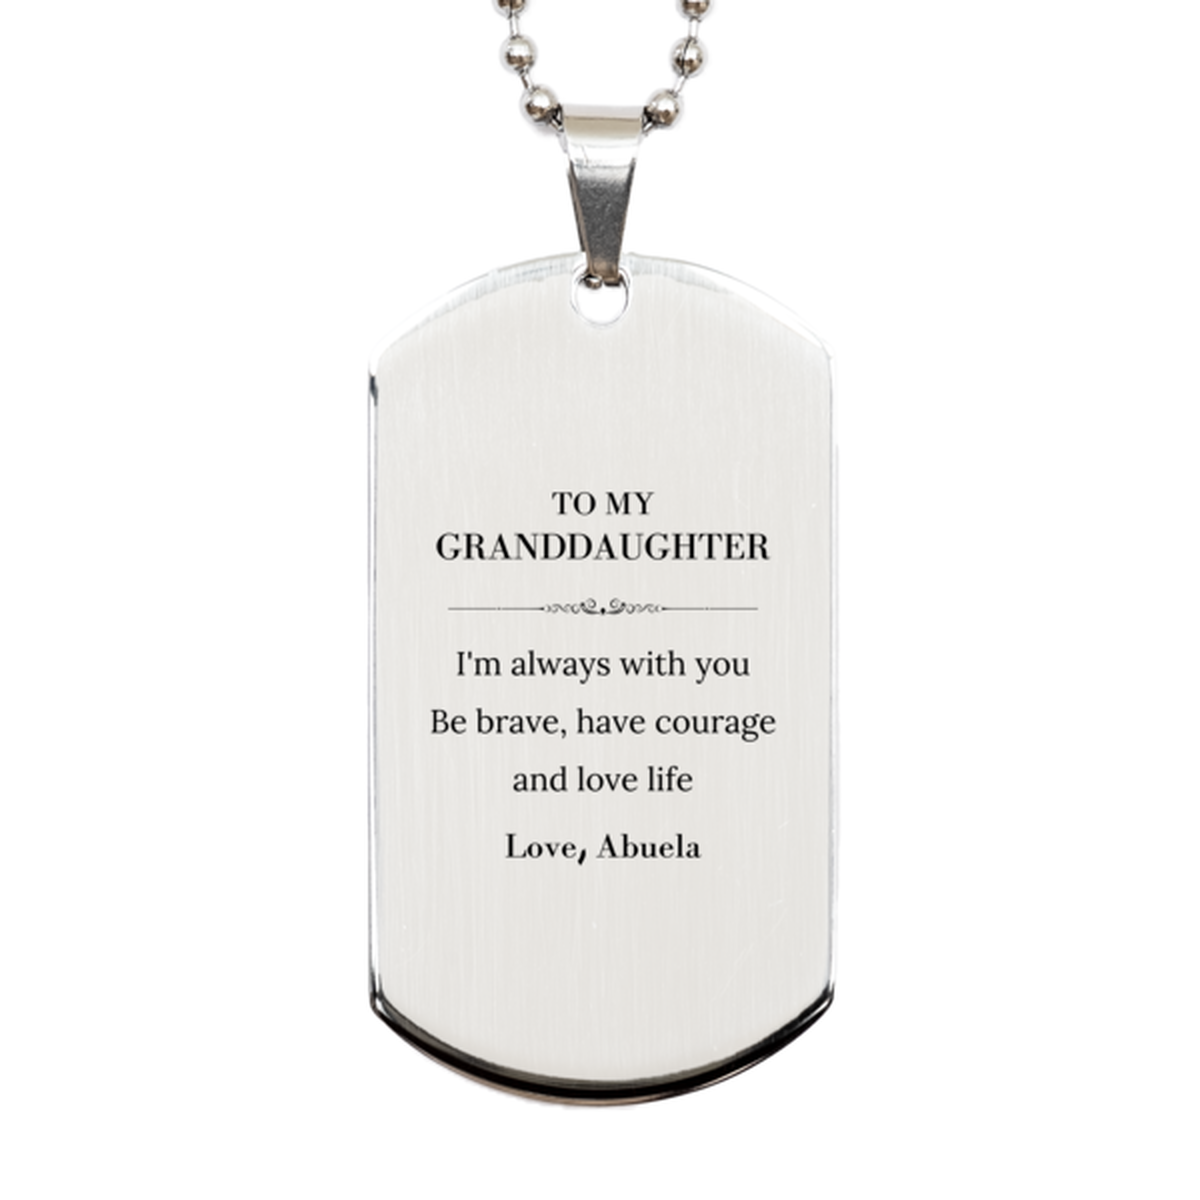 To My Granddaughter Gifts from Abuela, Unique Silver Dog Tag Inspirational Christmas Birthday Graduation Gifts for Granddaughter I'm always with you. Be brave, have courage and love life. Love, Abuela